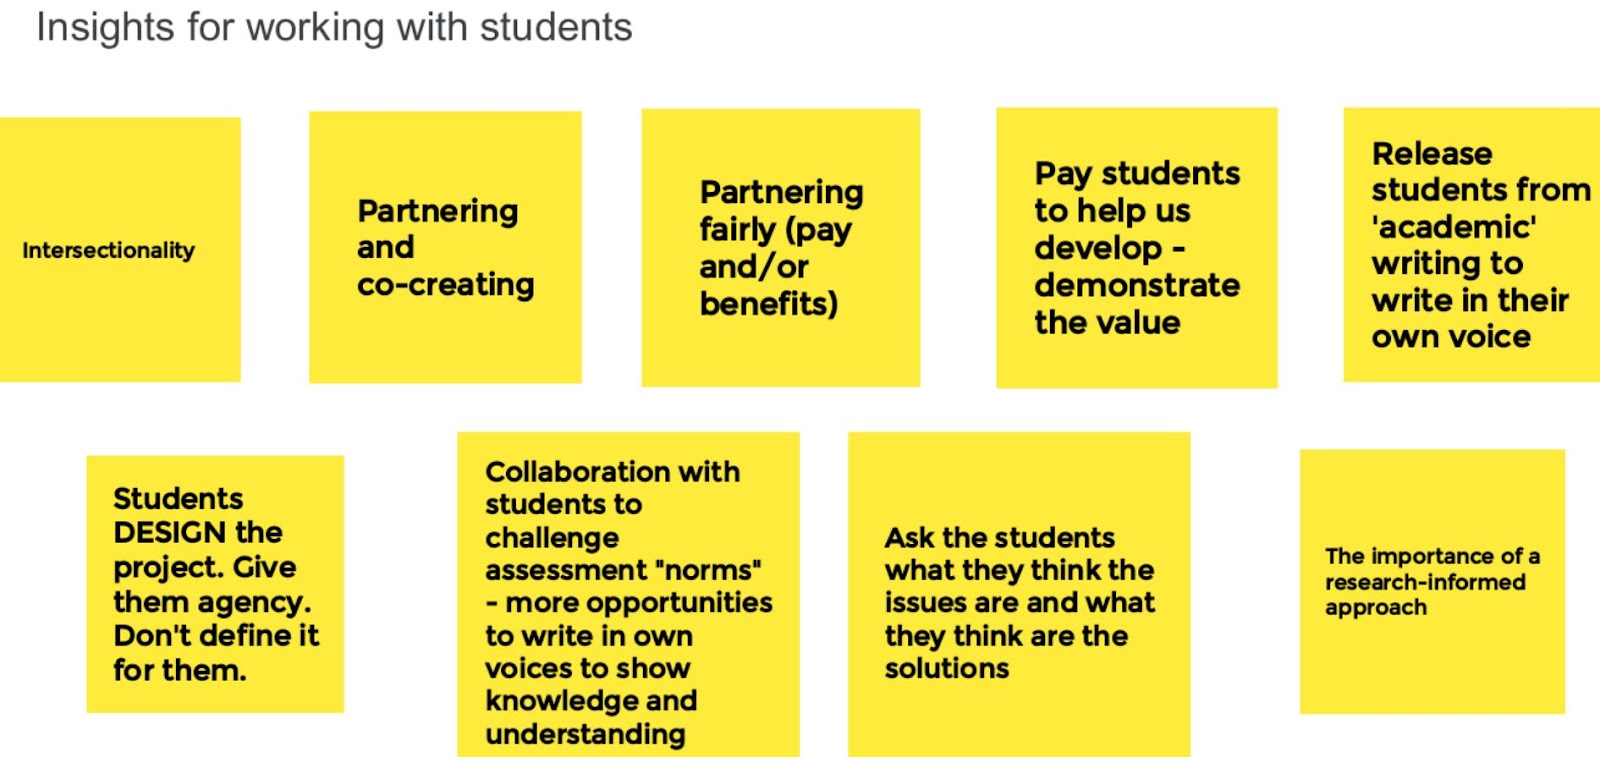 Post-it notes to identify ways of working with students